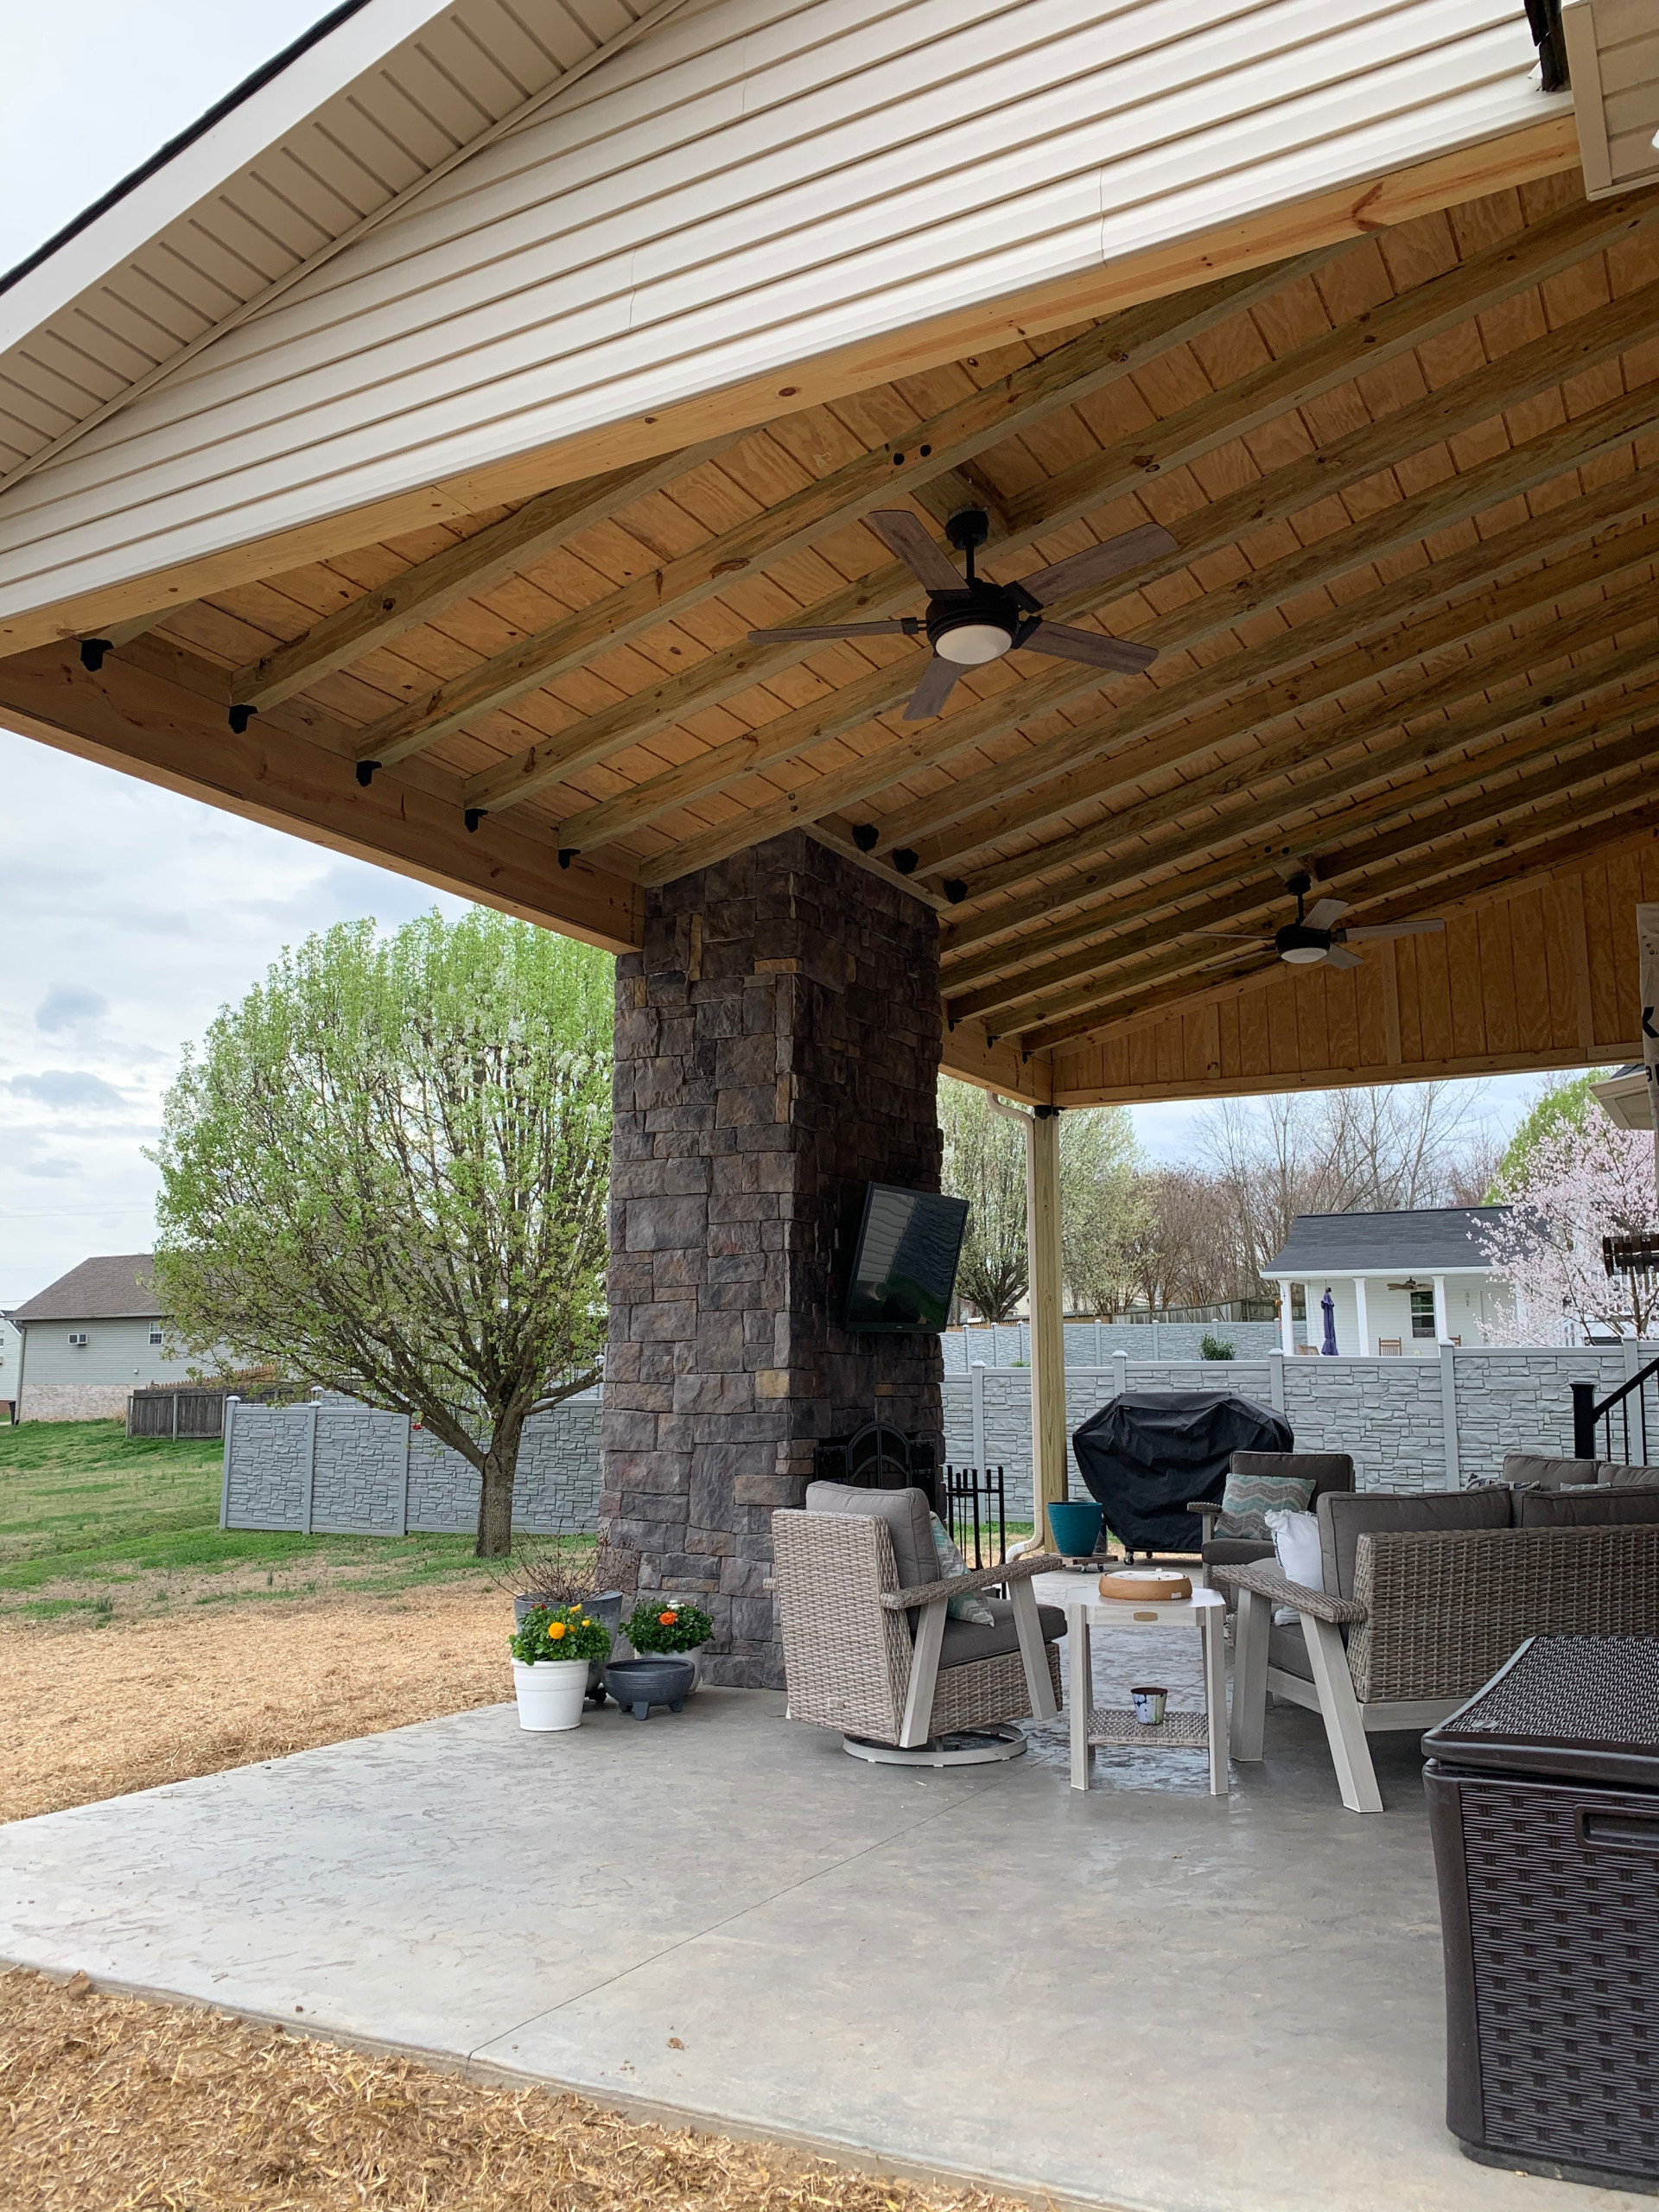 Shed roof Patio w/fireplace